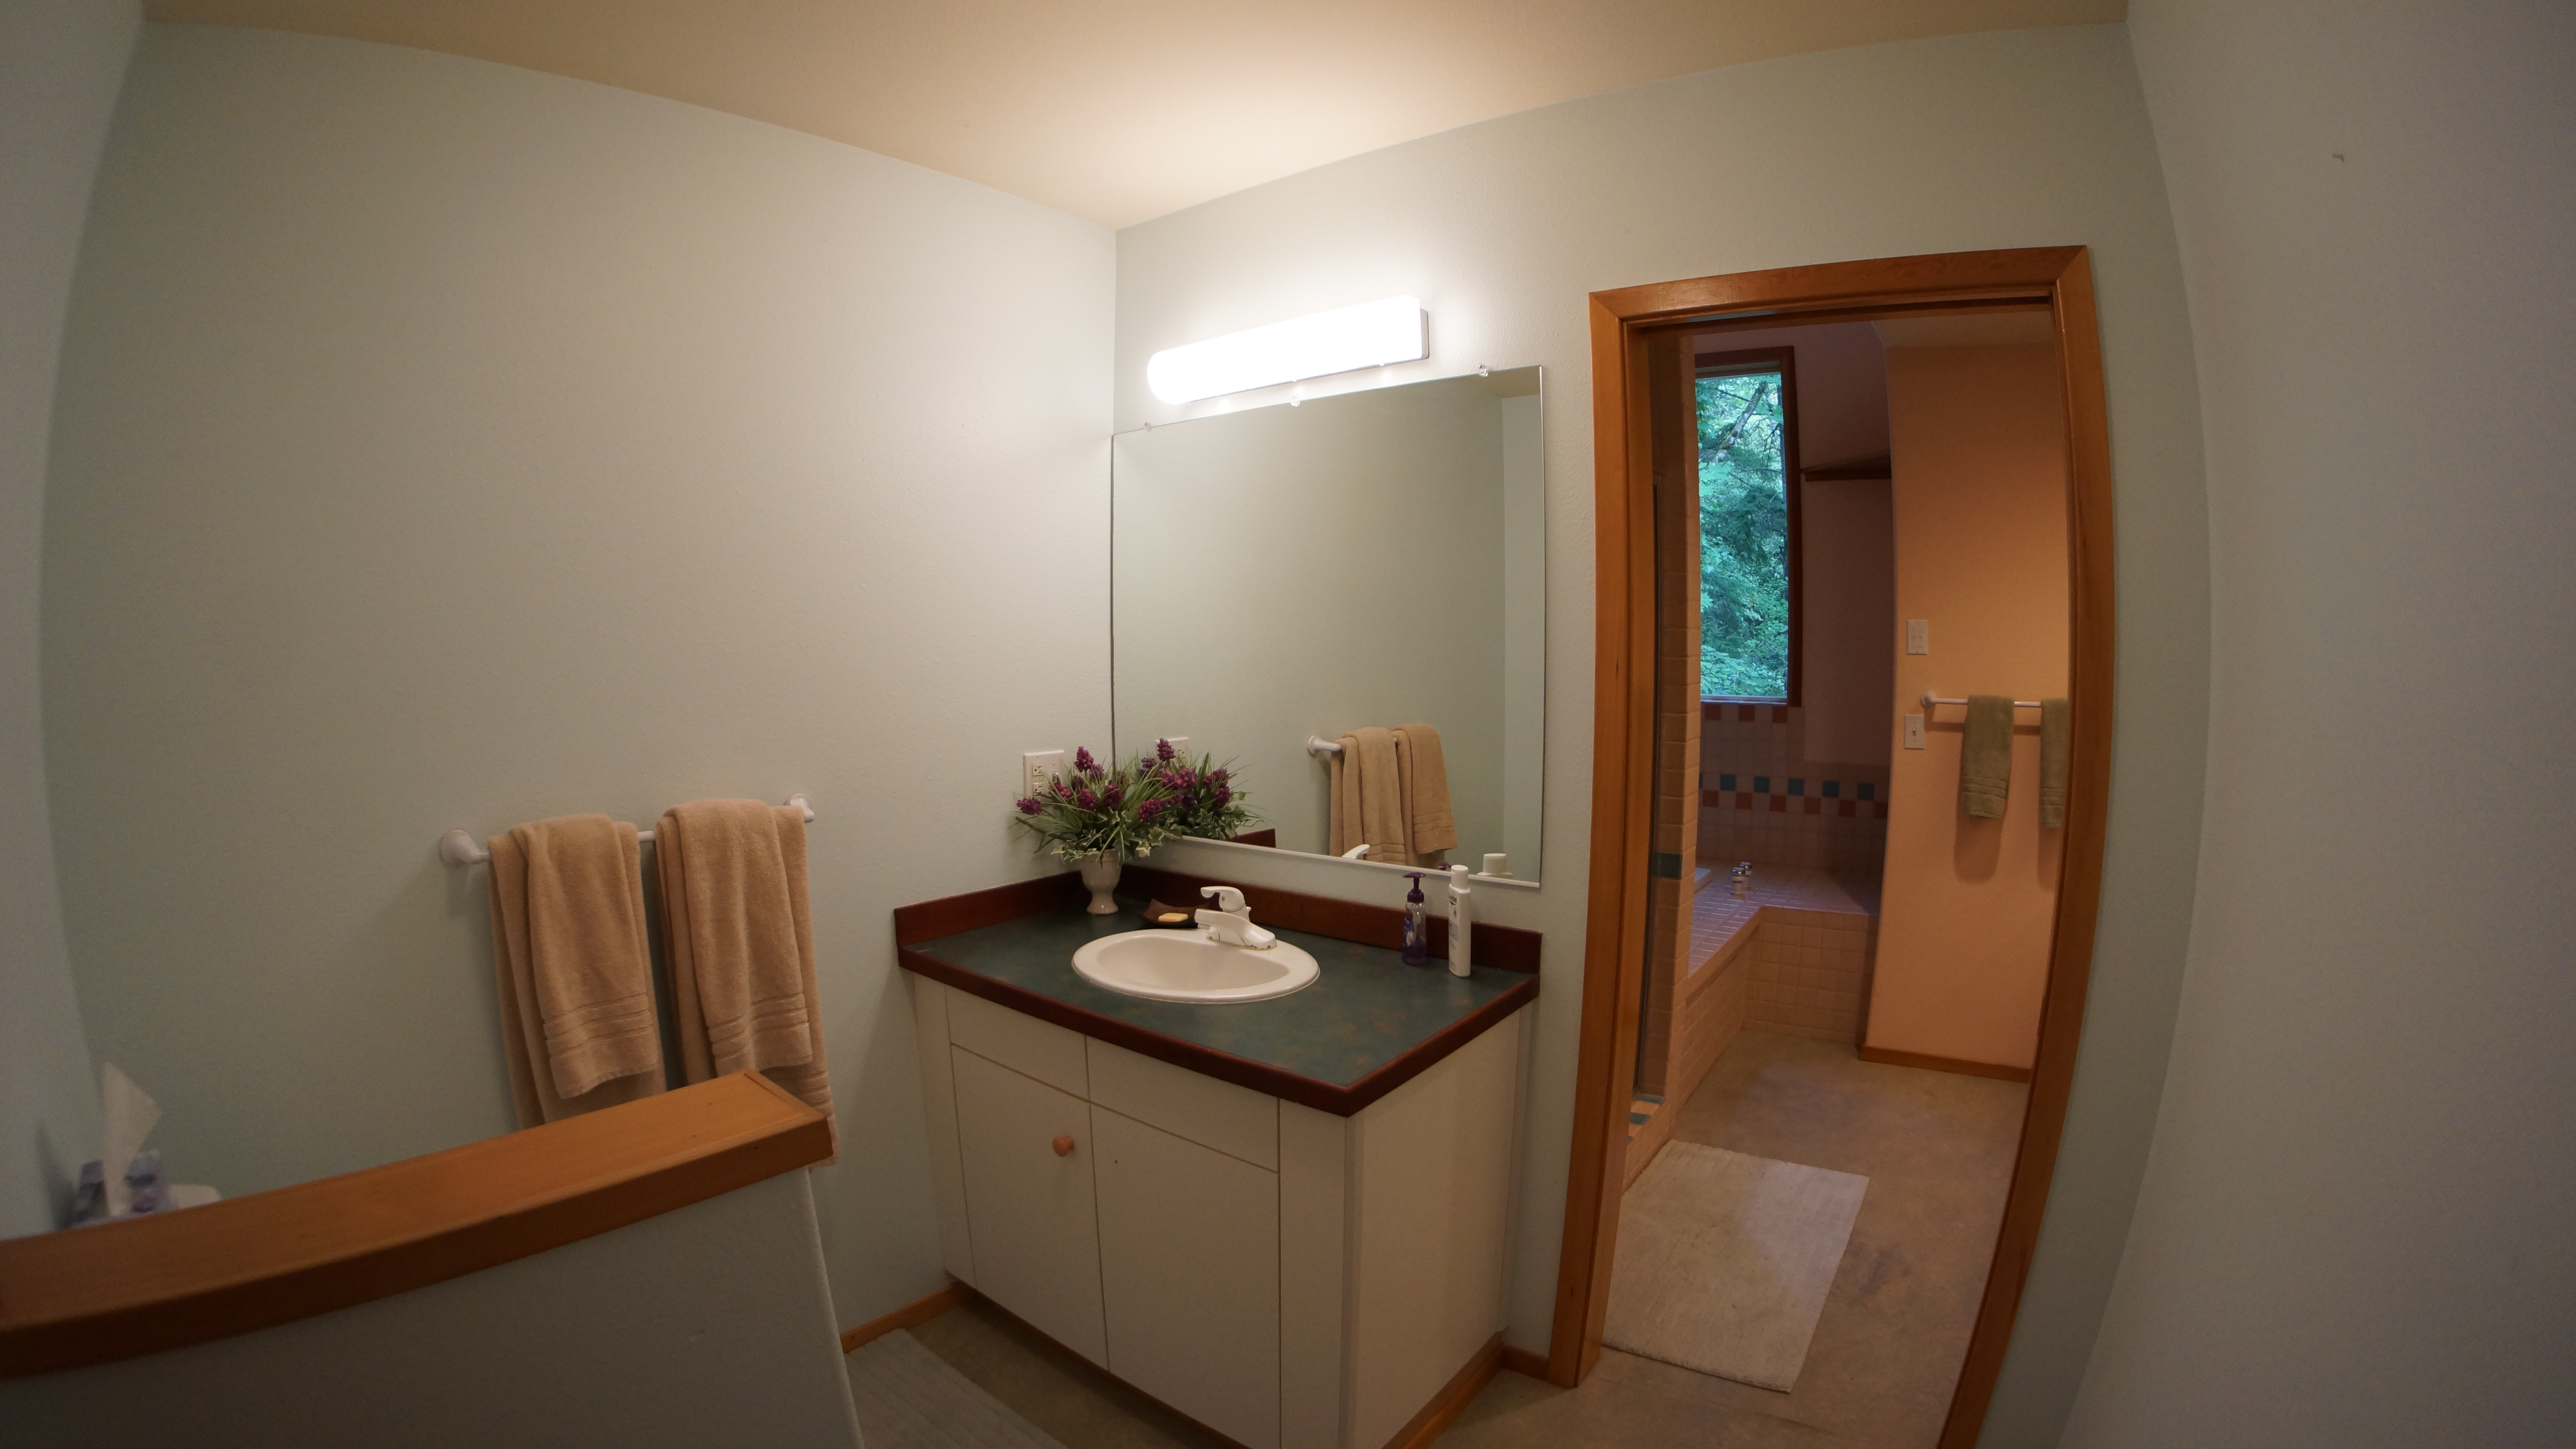 Upstairs Bathroom with His & Her Sinks in separate rooms. <BR>Privacy pocket door closes between rooms.